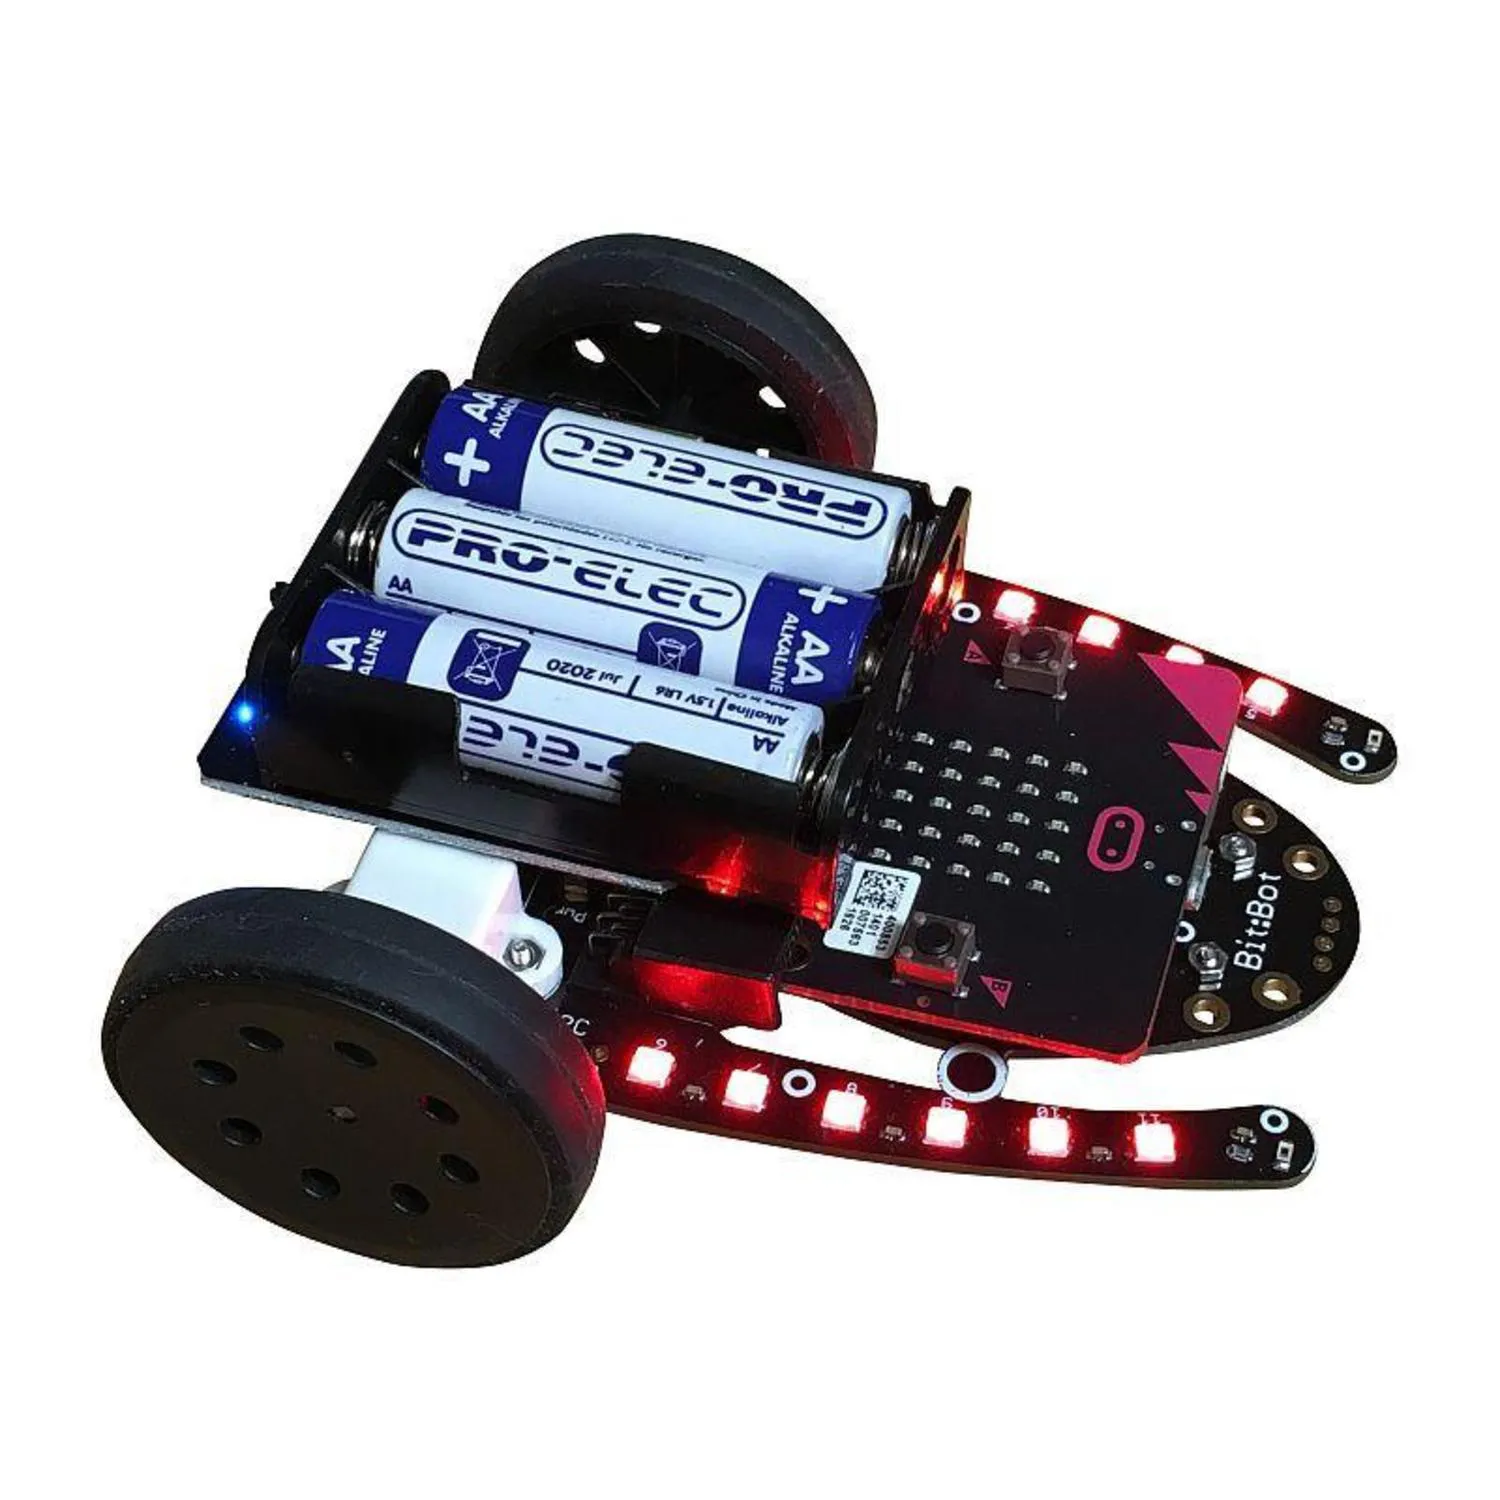 Photo of Bit:Bot Robot for BBC Micro:Bit (BitBot for MicroBit)